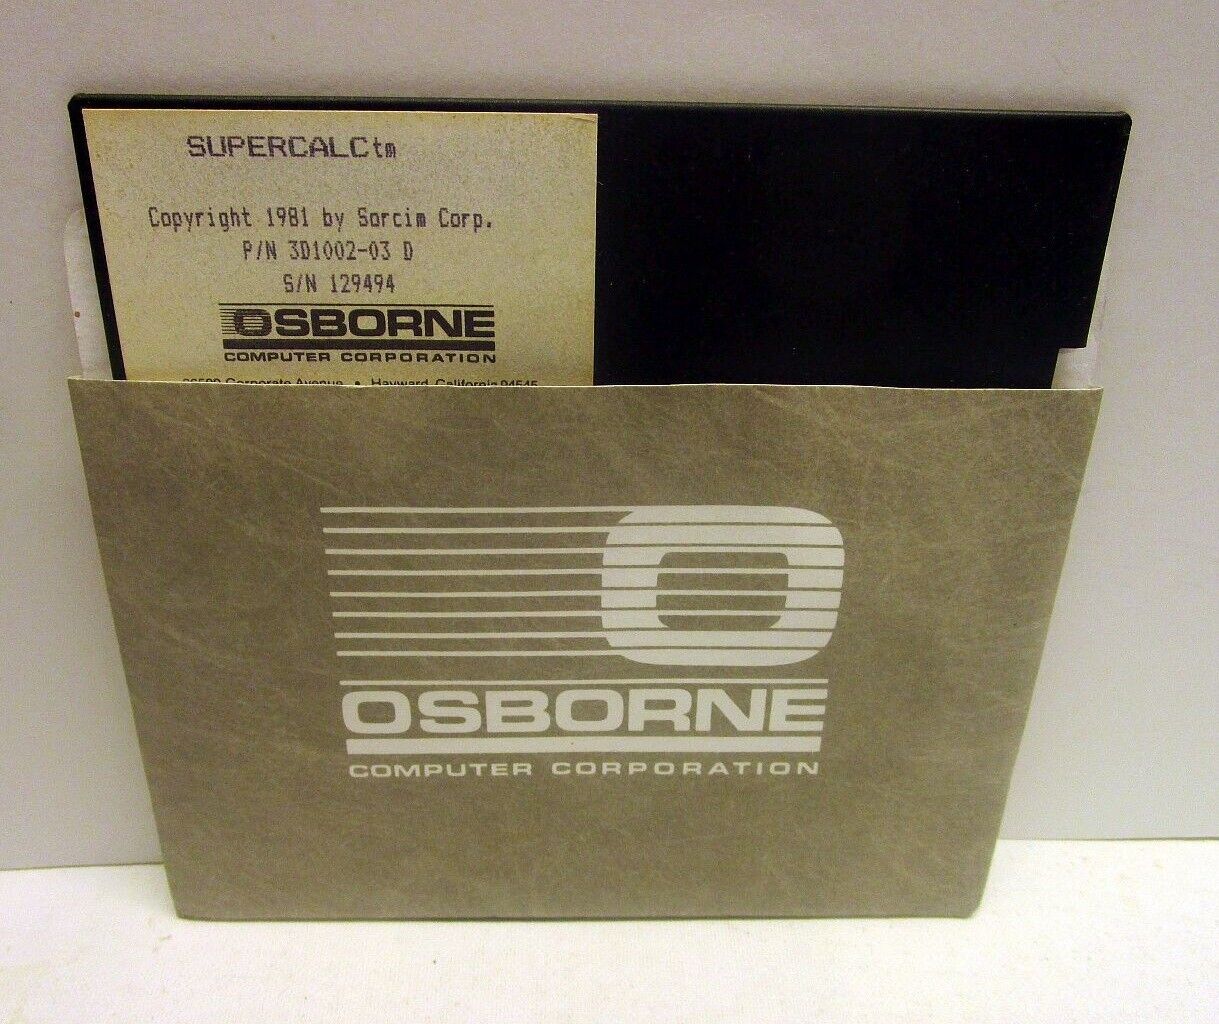 RARE Supercalc by Sorcim for Osborne Computers, 1981